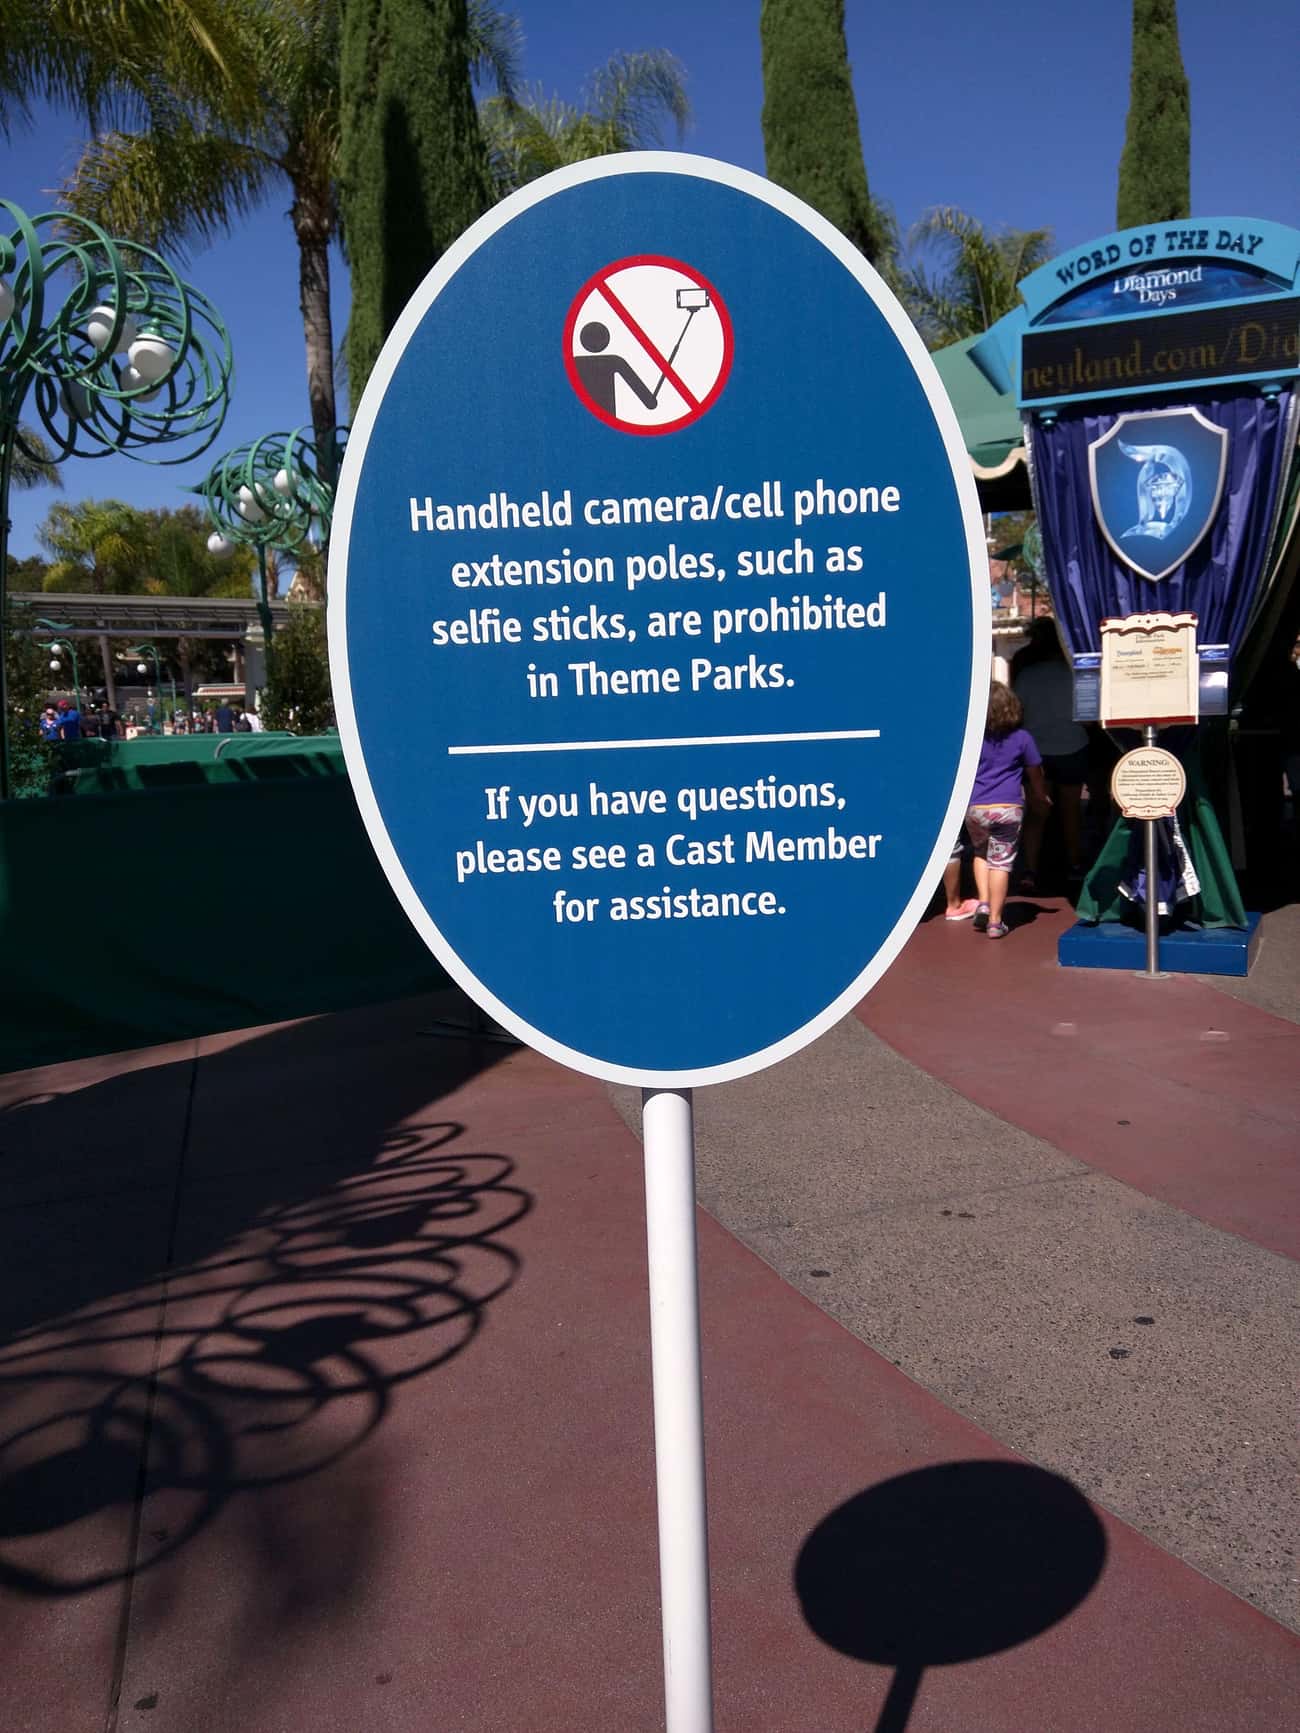 Leave Your Selfie Stick at Home